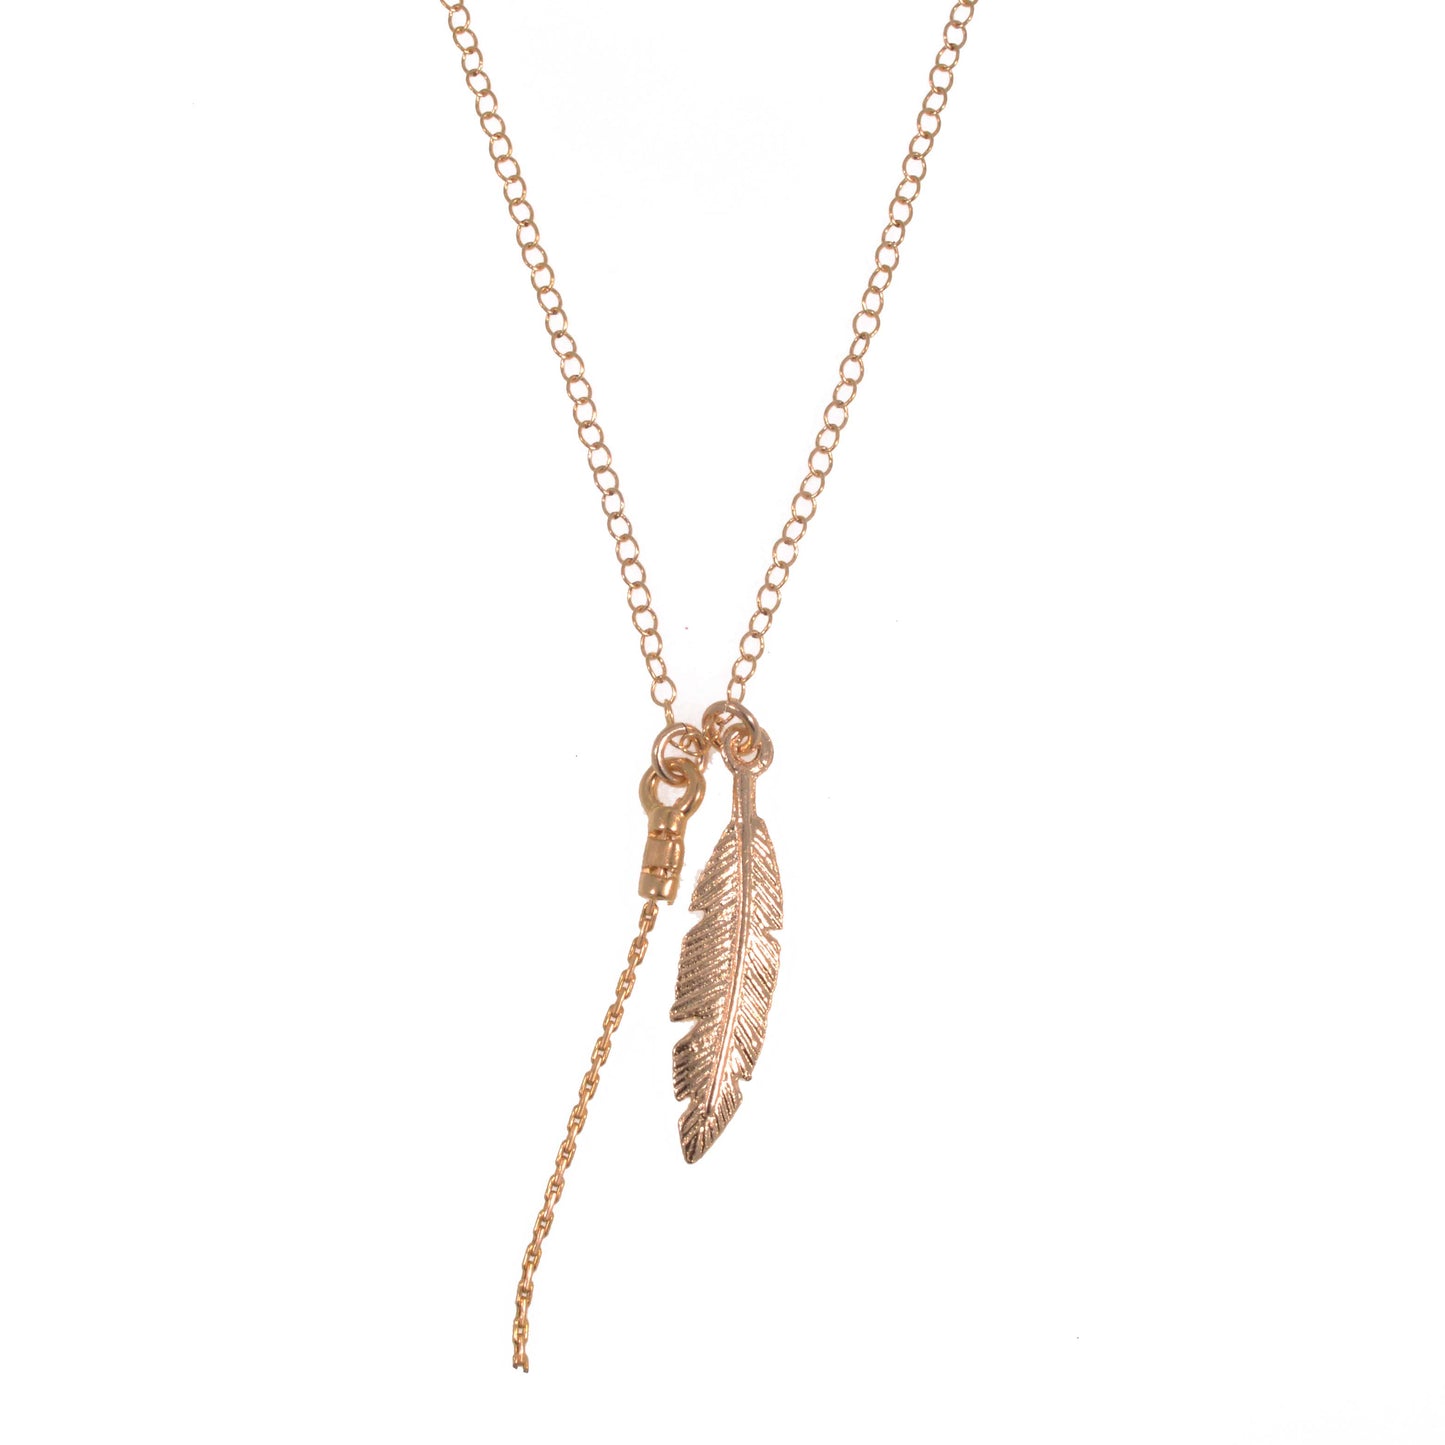 Feather necklace 14k Gold filled Chain Feather Pendant Necklace